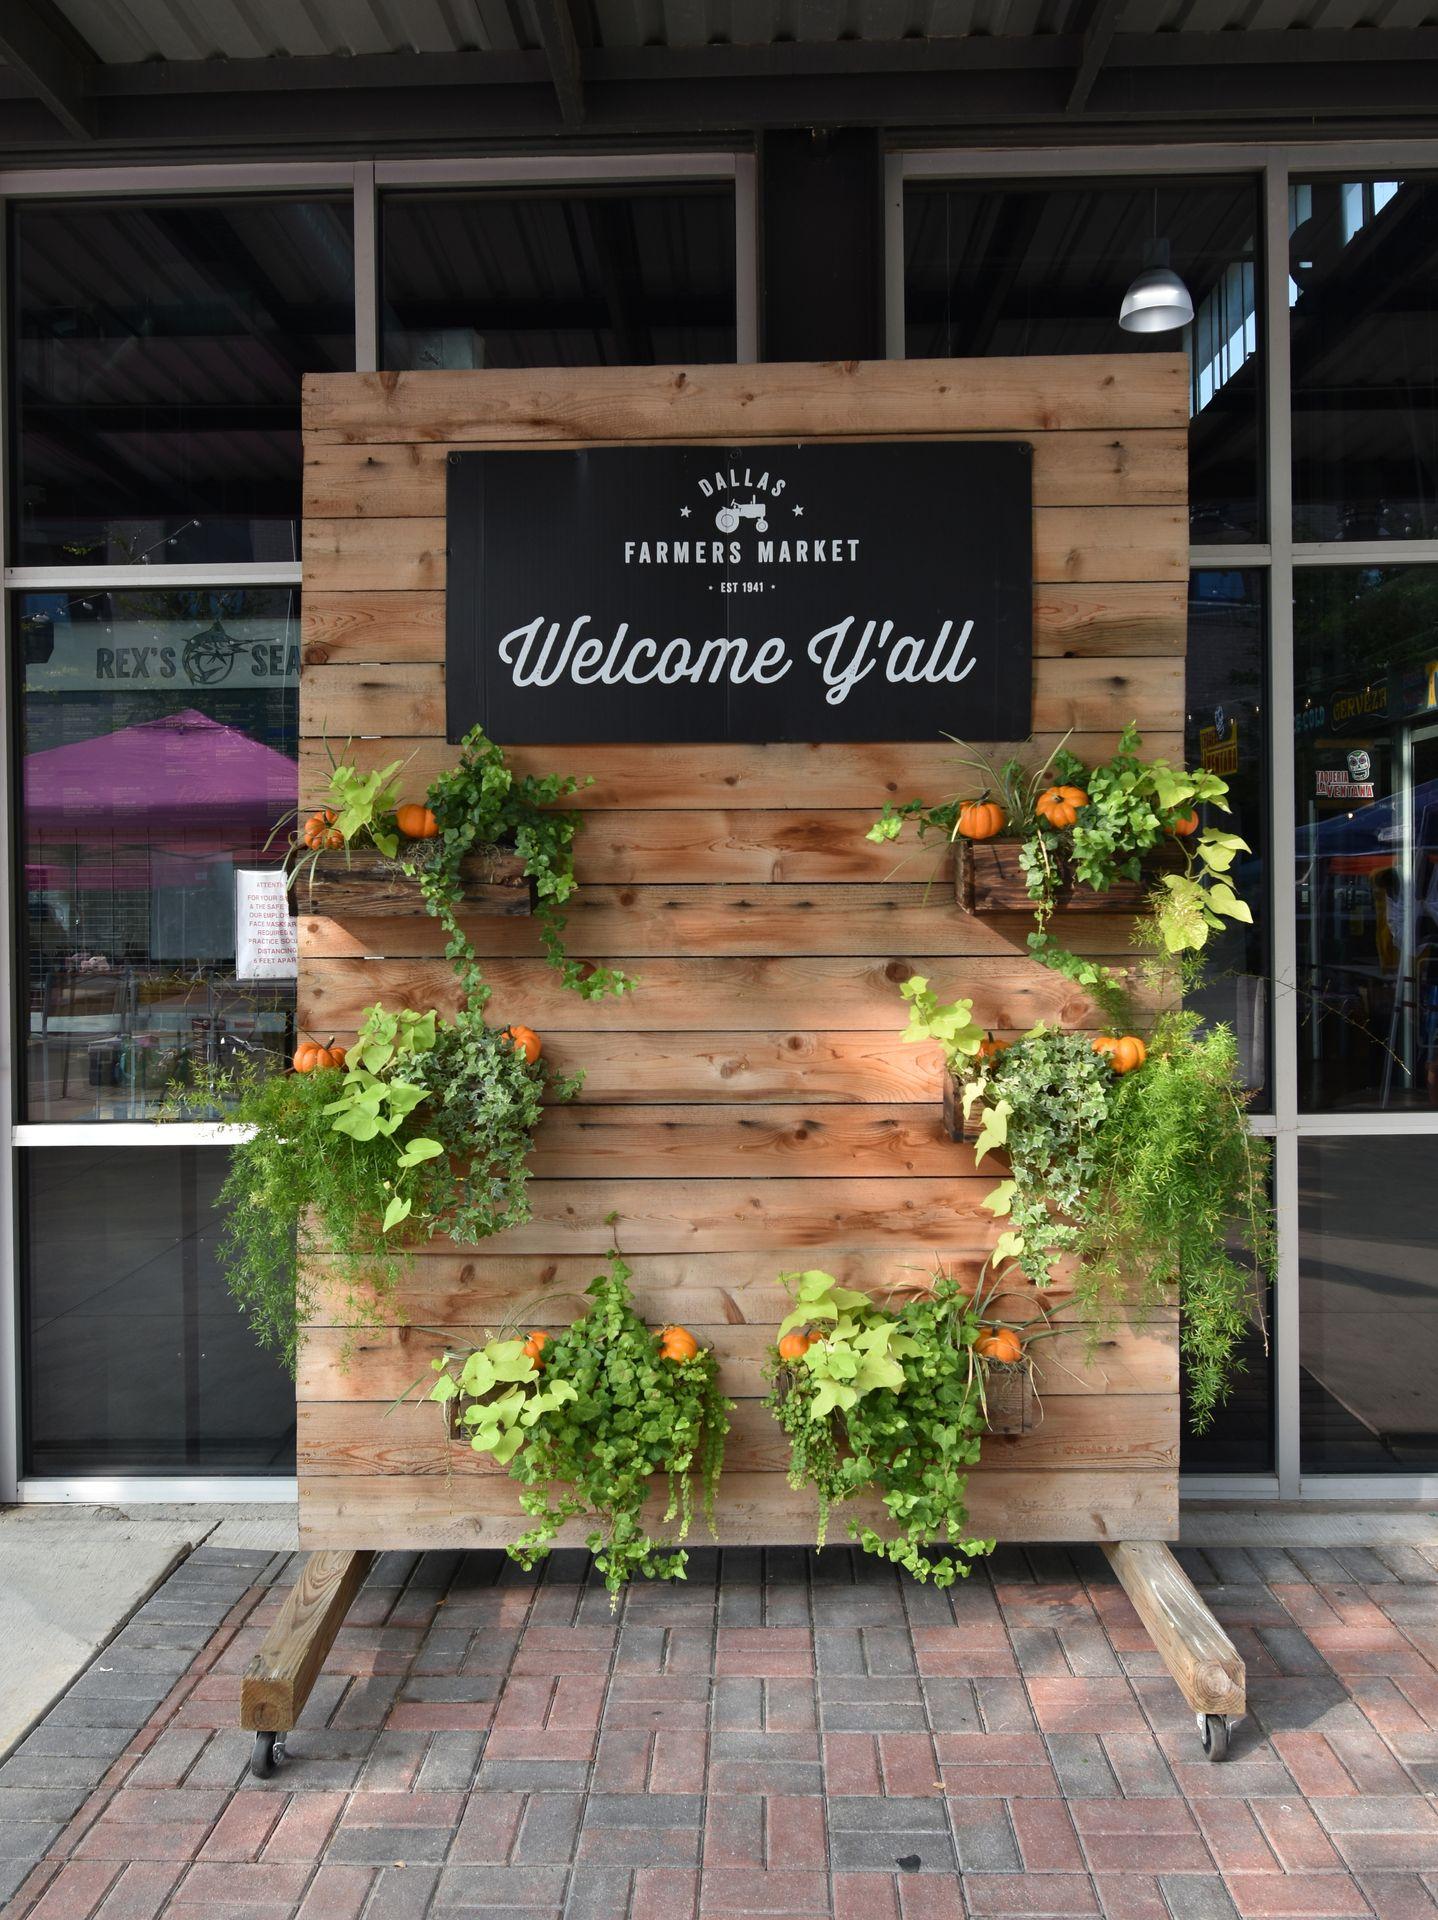 A wooden display that reads "Welcome Y'all" and has hanging plants outside of the Dallas Farmer's Market.